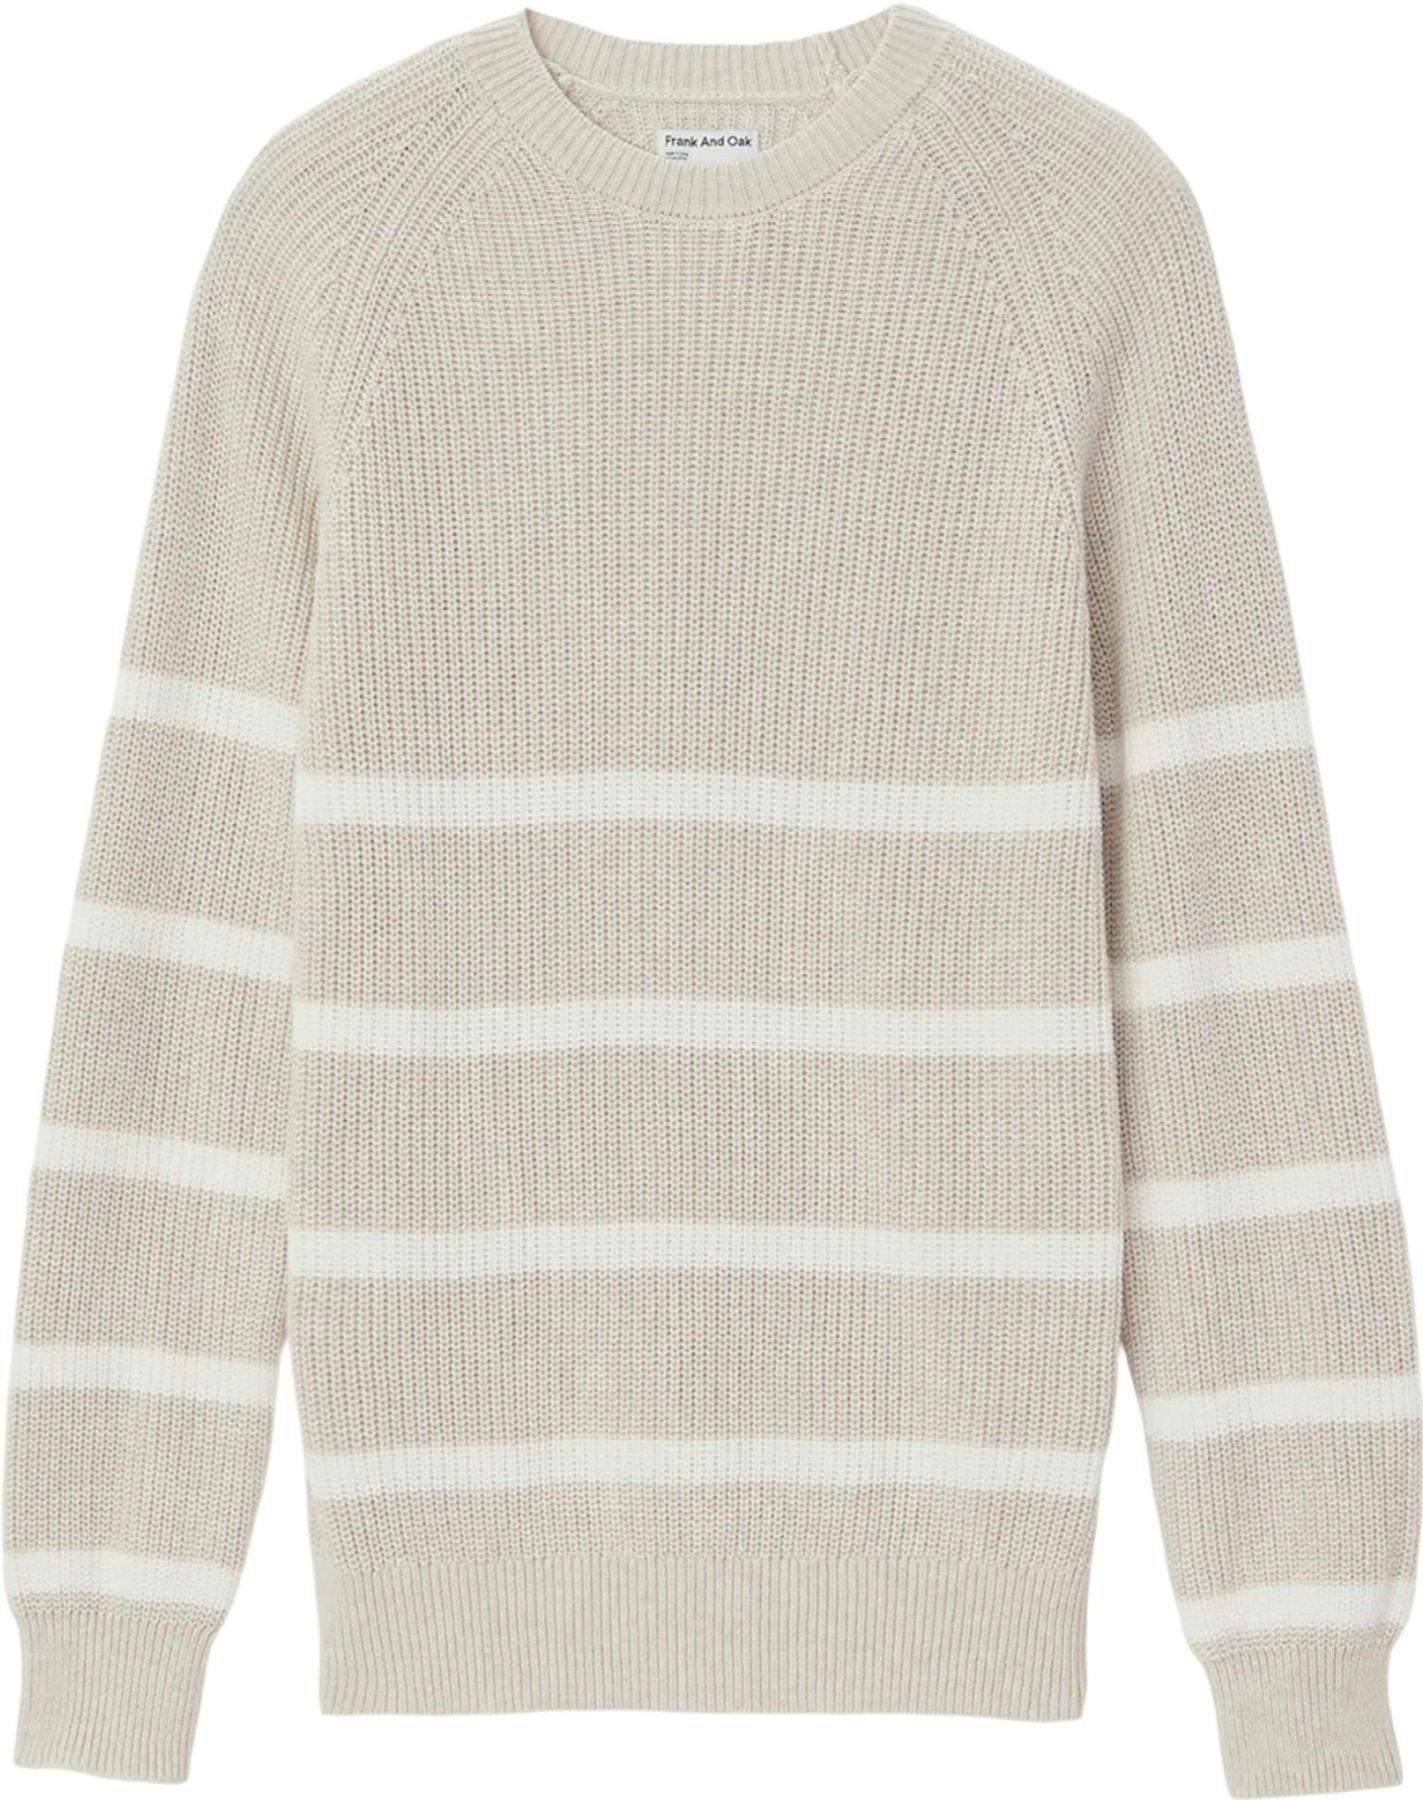 Product image for Striped Crewneck Sweater - Men's